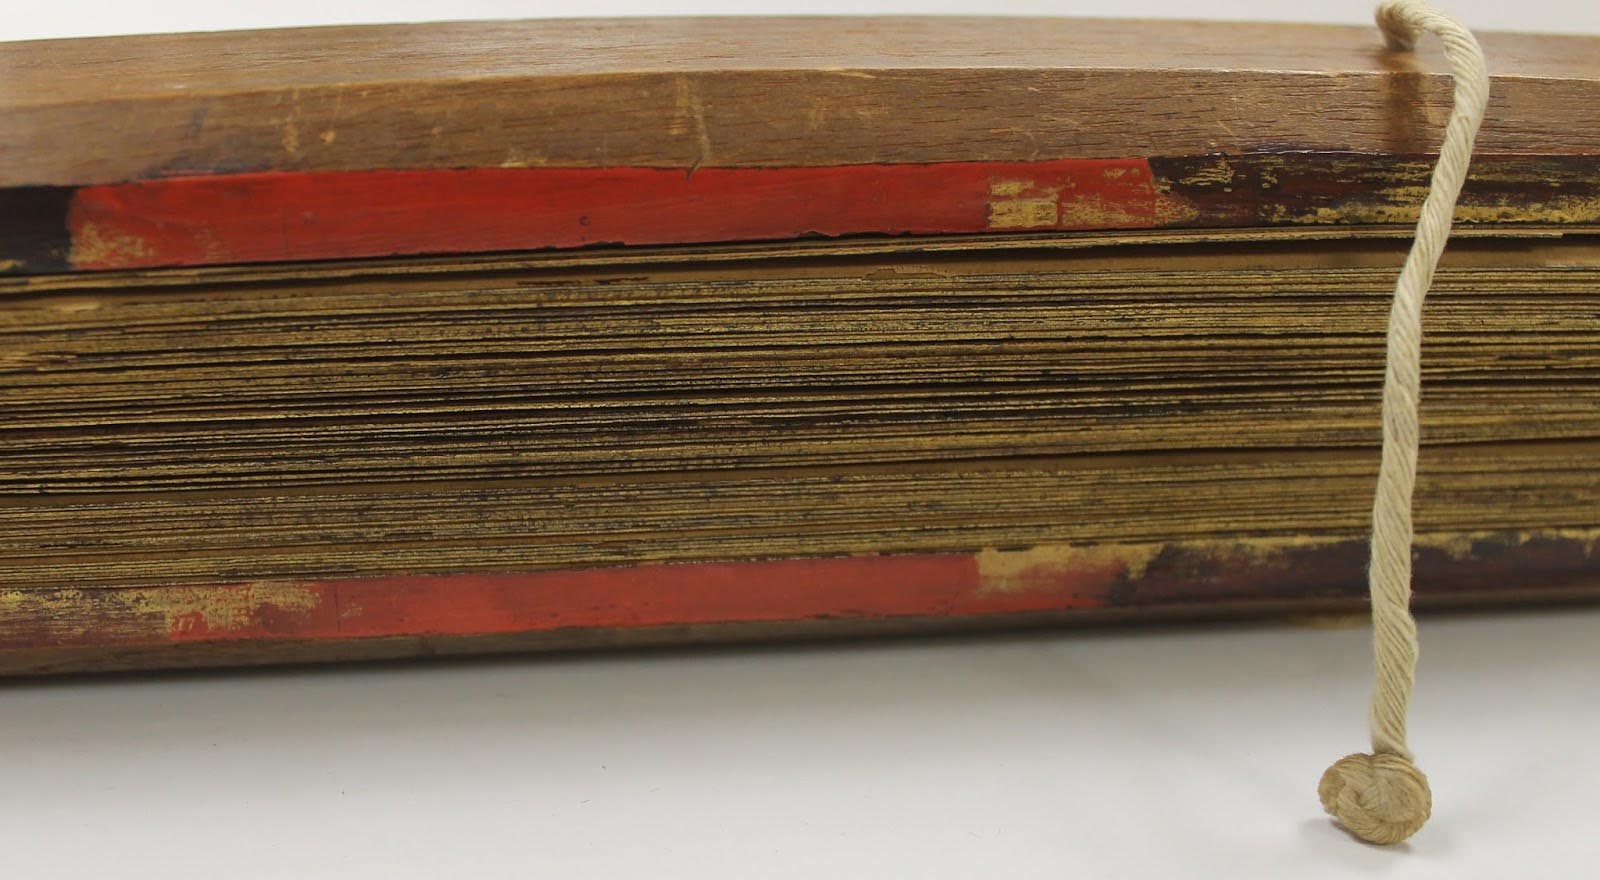 The spine of a Burmese text.